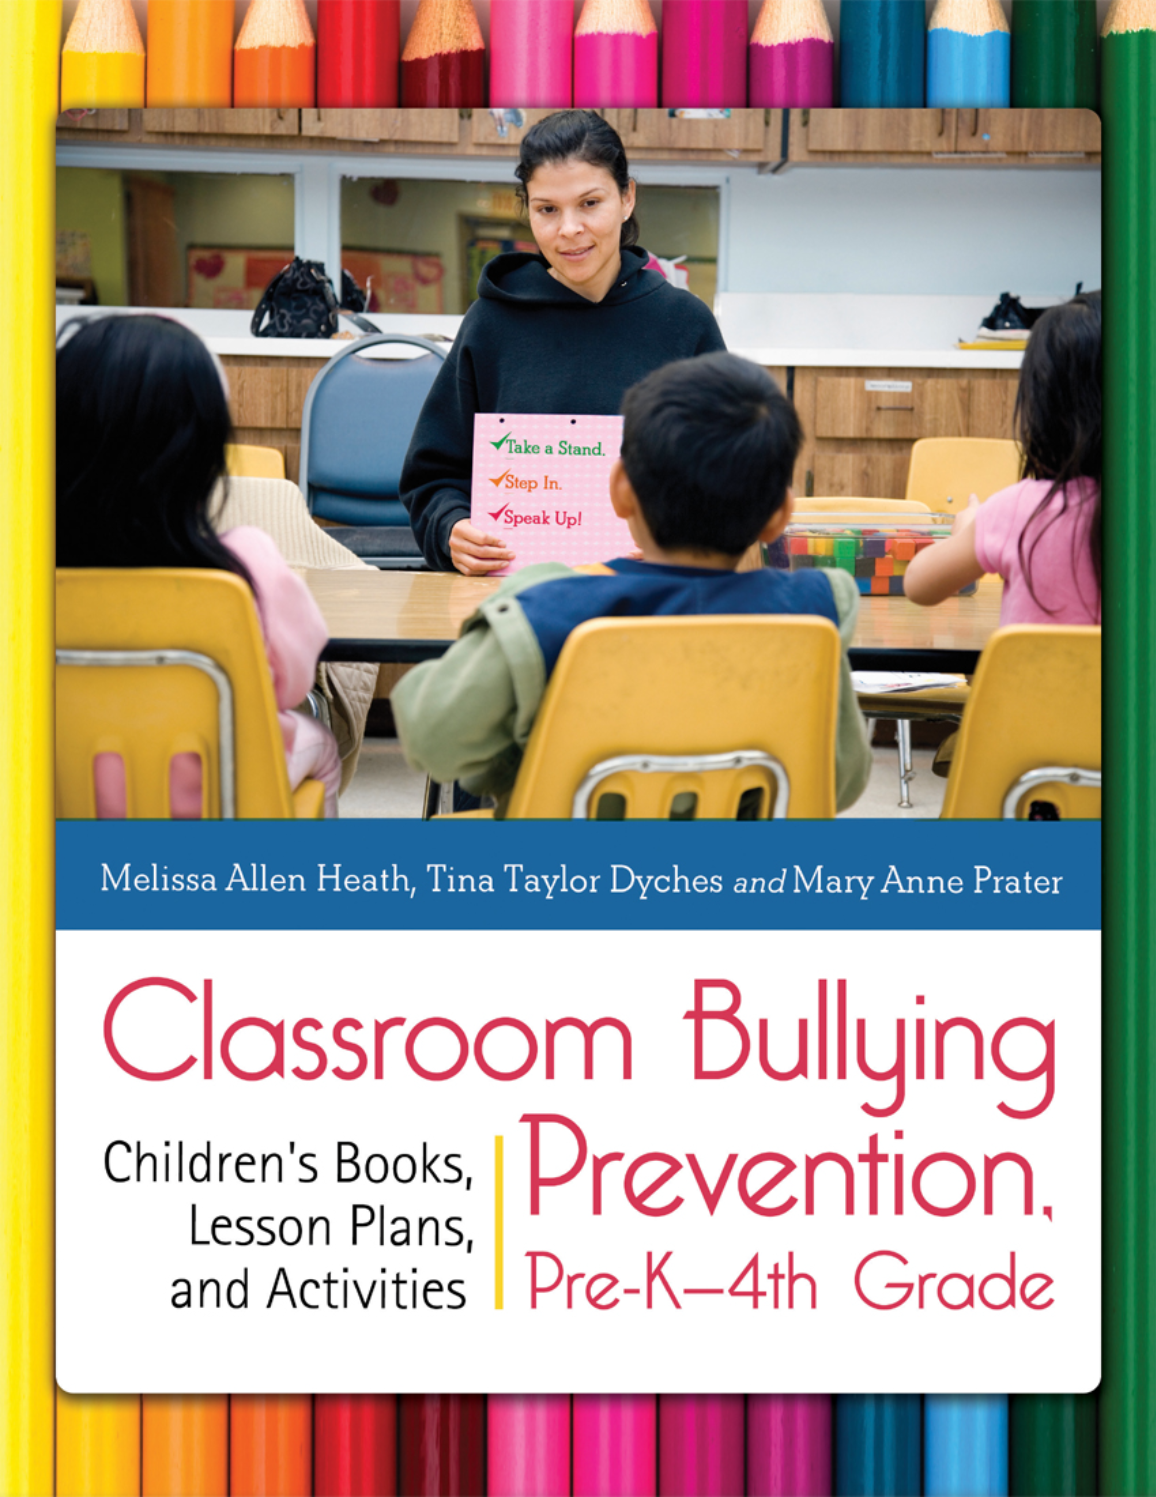 Classroom Bullying Prevention, Pre-K–4th Grade: Children's Books, Lesson Plans, and Activities page Cover1